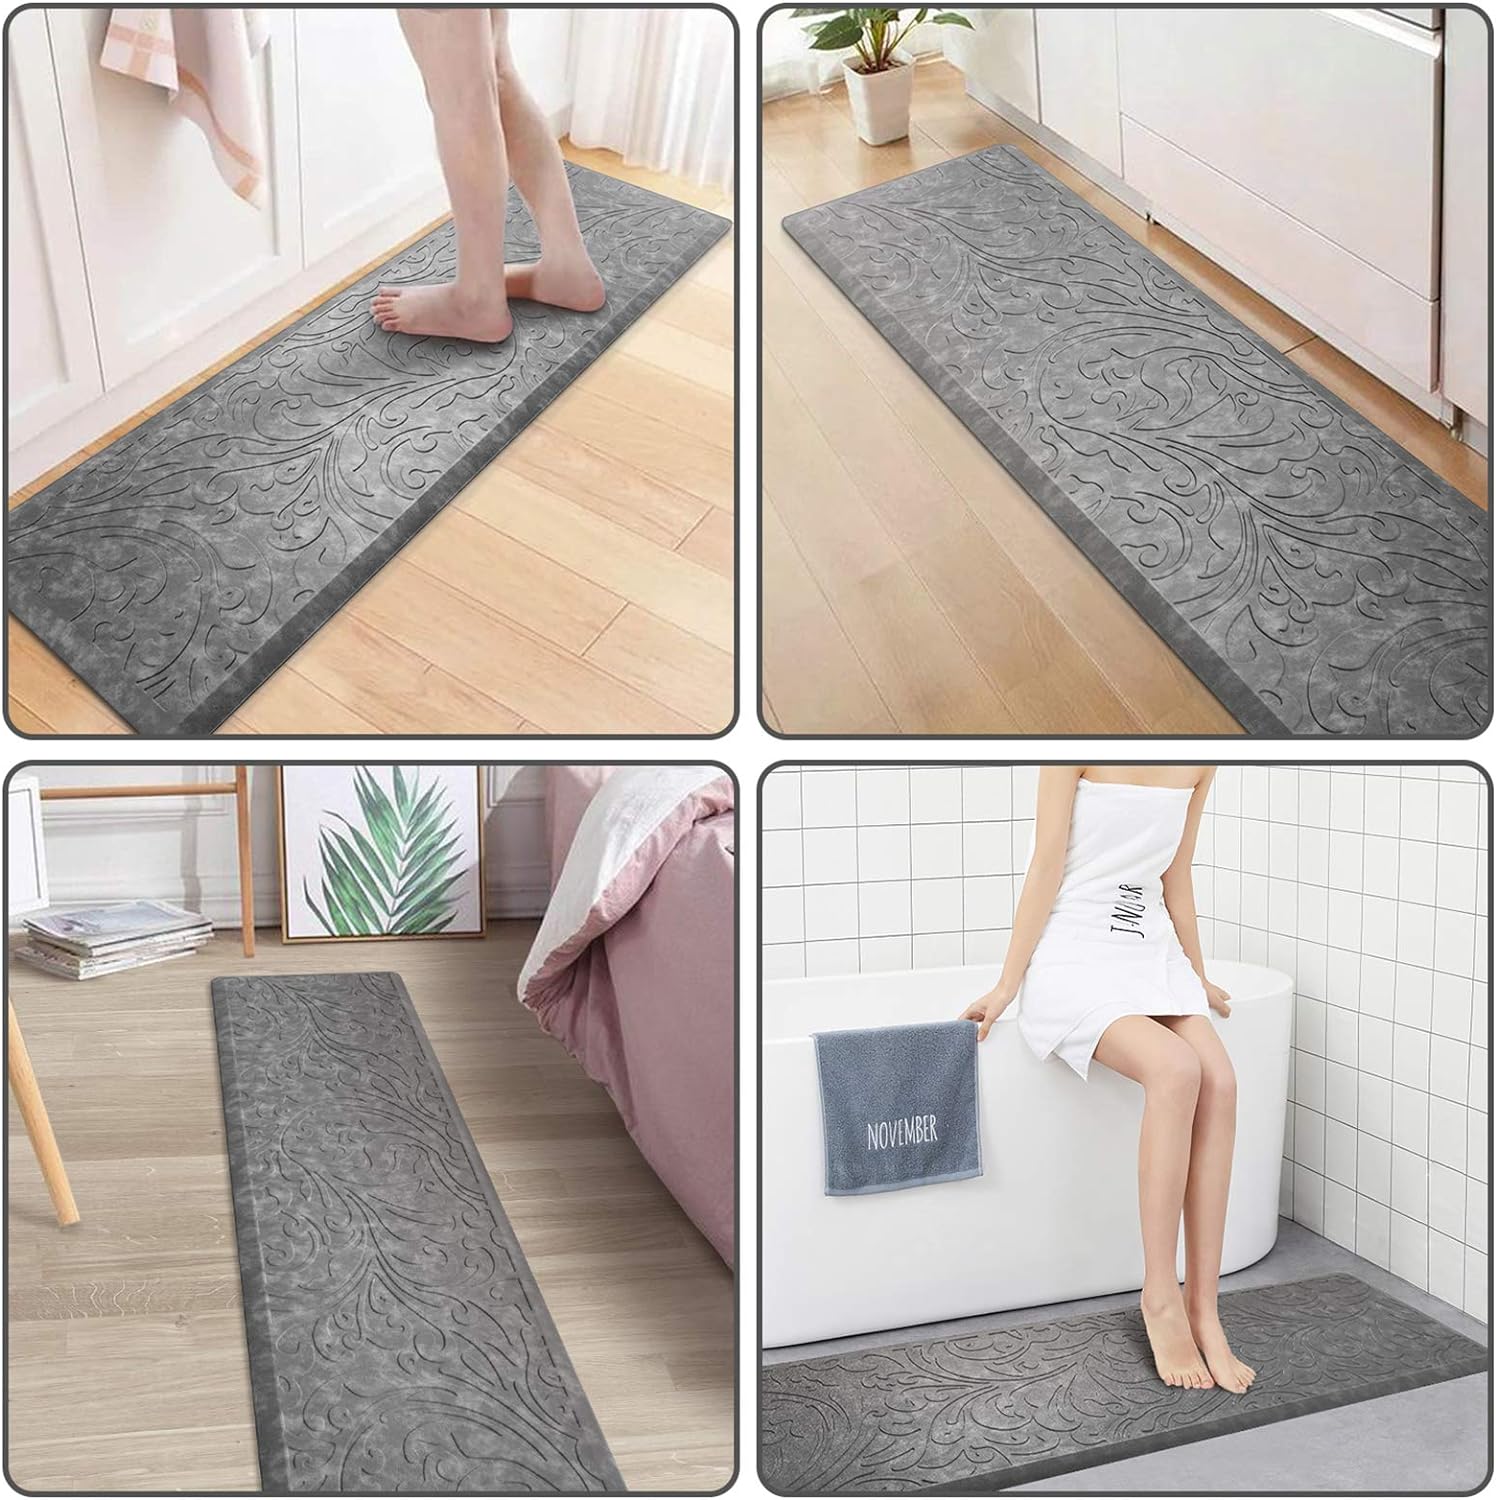 KMAT Kitchen Mat Cushioned Anti-Fatigue Waterproof Non-Slip Standing Mat Ergonomic Comfort Rug for Home,Office,Sink,Laundry,Desk 17.3 (W) x 60(L),Brown